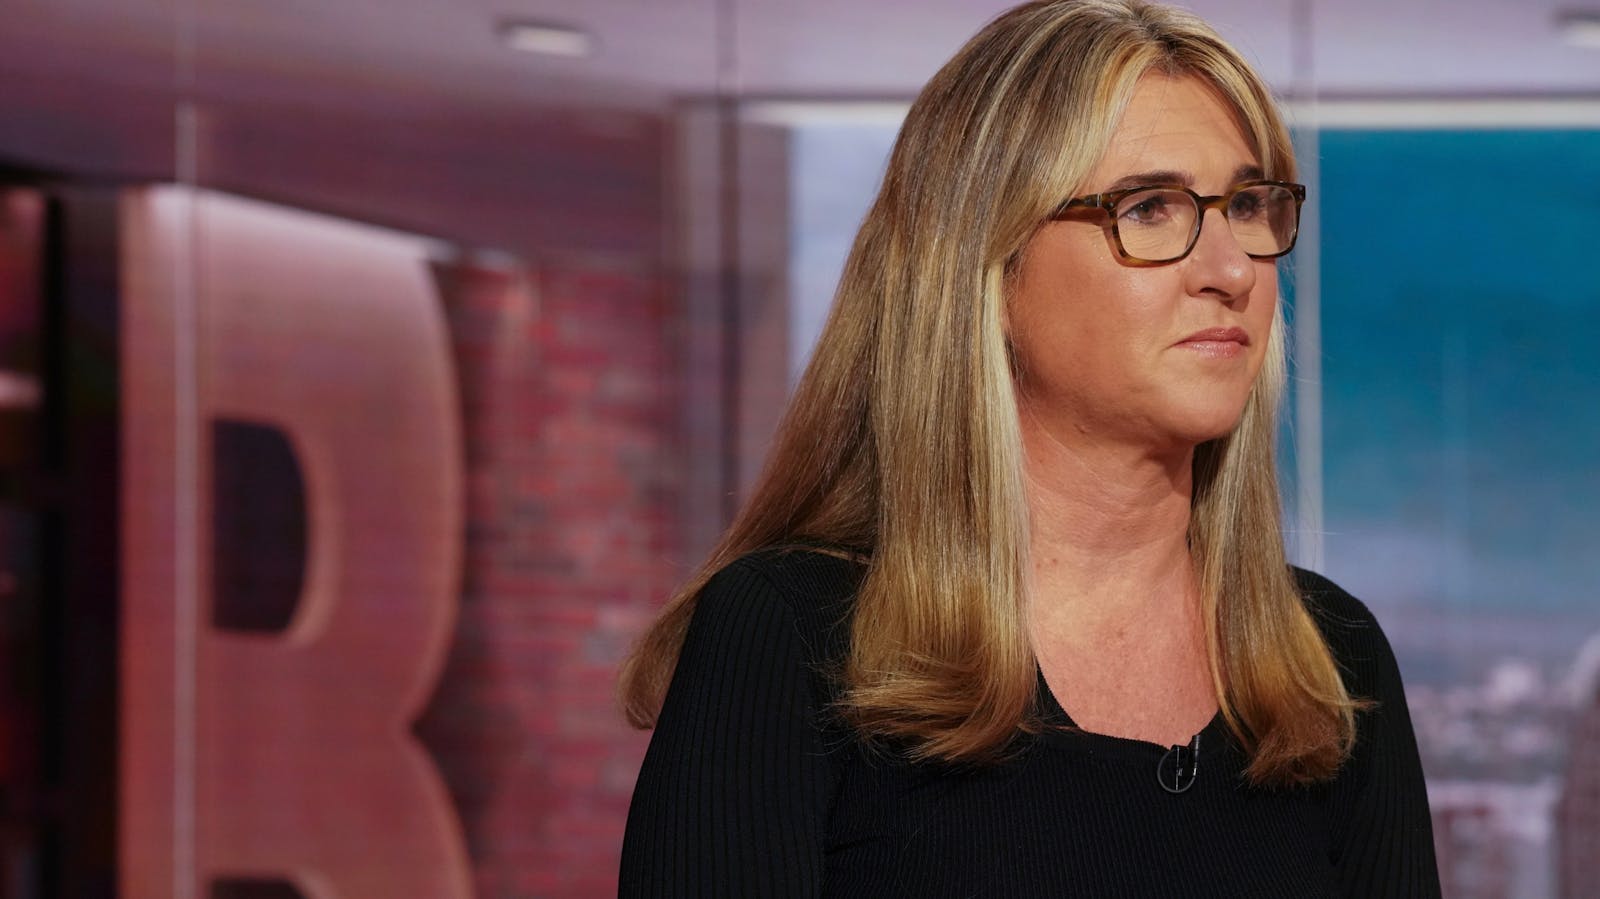 Vice CEO Nancy Dubuc. Photo by Bloomberg